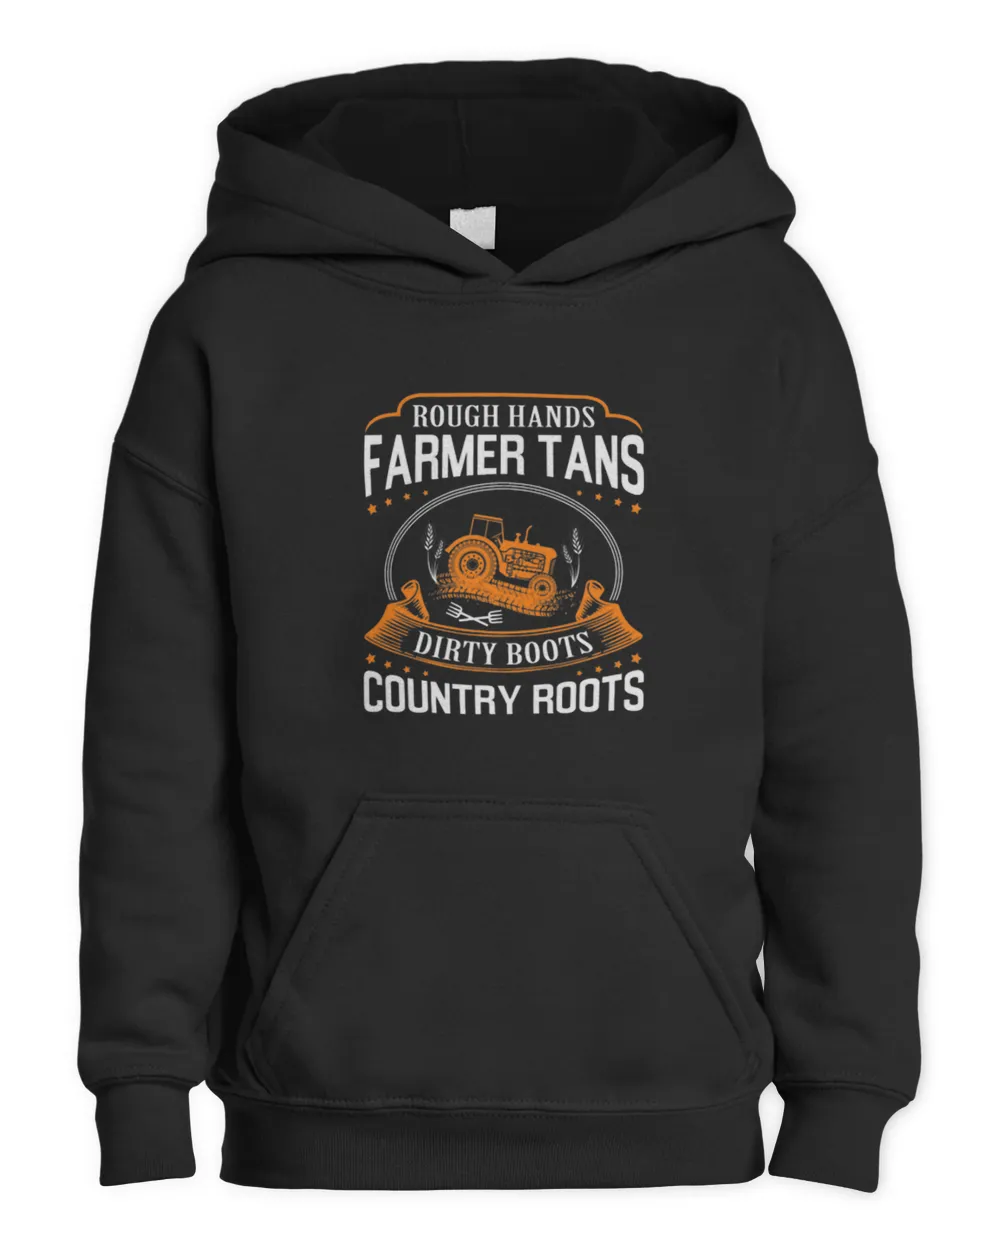 Rough Hands Farmer Tans Dirty Boots Country Roots Tractor